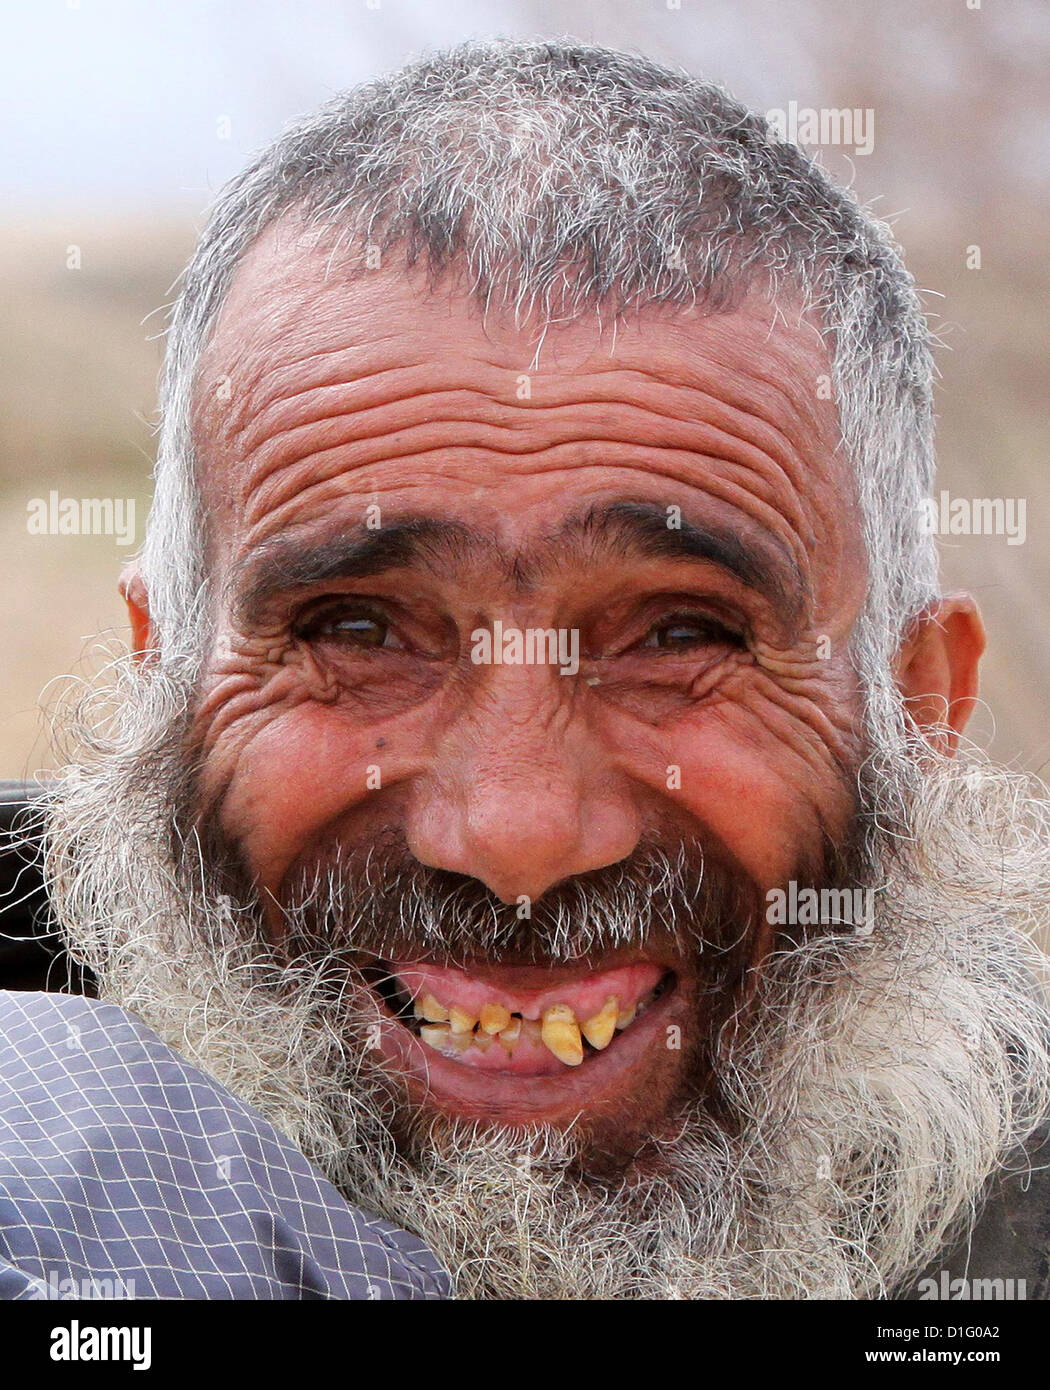 A local Afghan of the Nawbot village smiles for a portrait as US Army  soldiers conduct a routine patrol of his village December 10, 2012 in Puli  Khumri, Afghanistan Stock Photo - Alamy